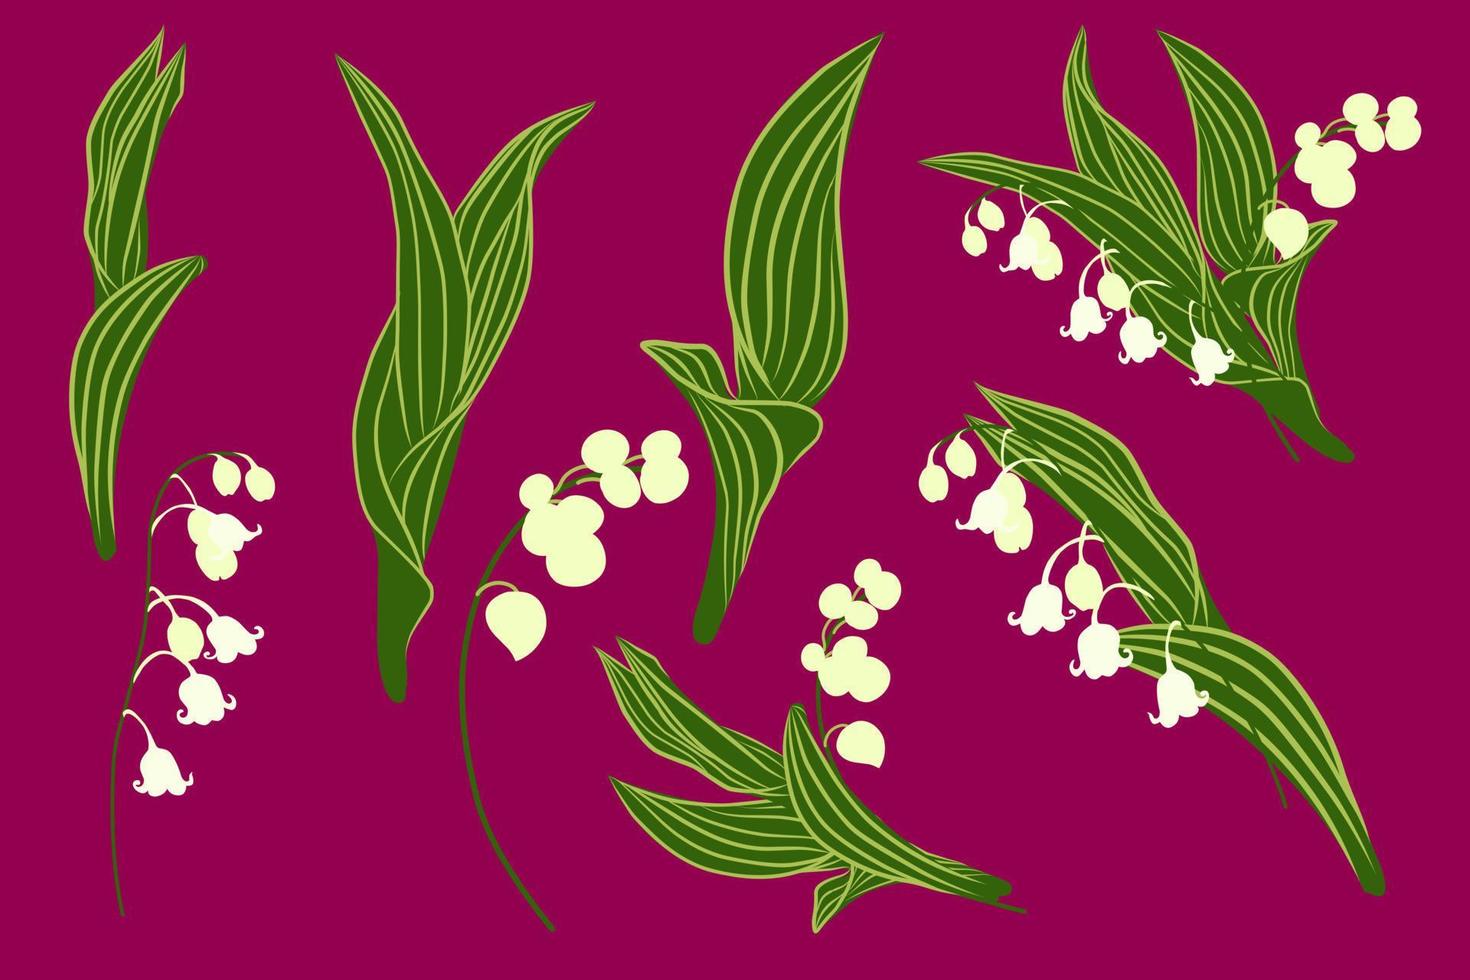 Spring set with lily of the valley flowers and herbs. Botanical illustration. vector